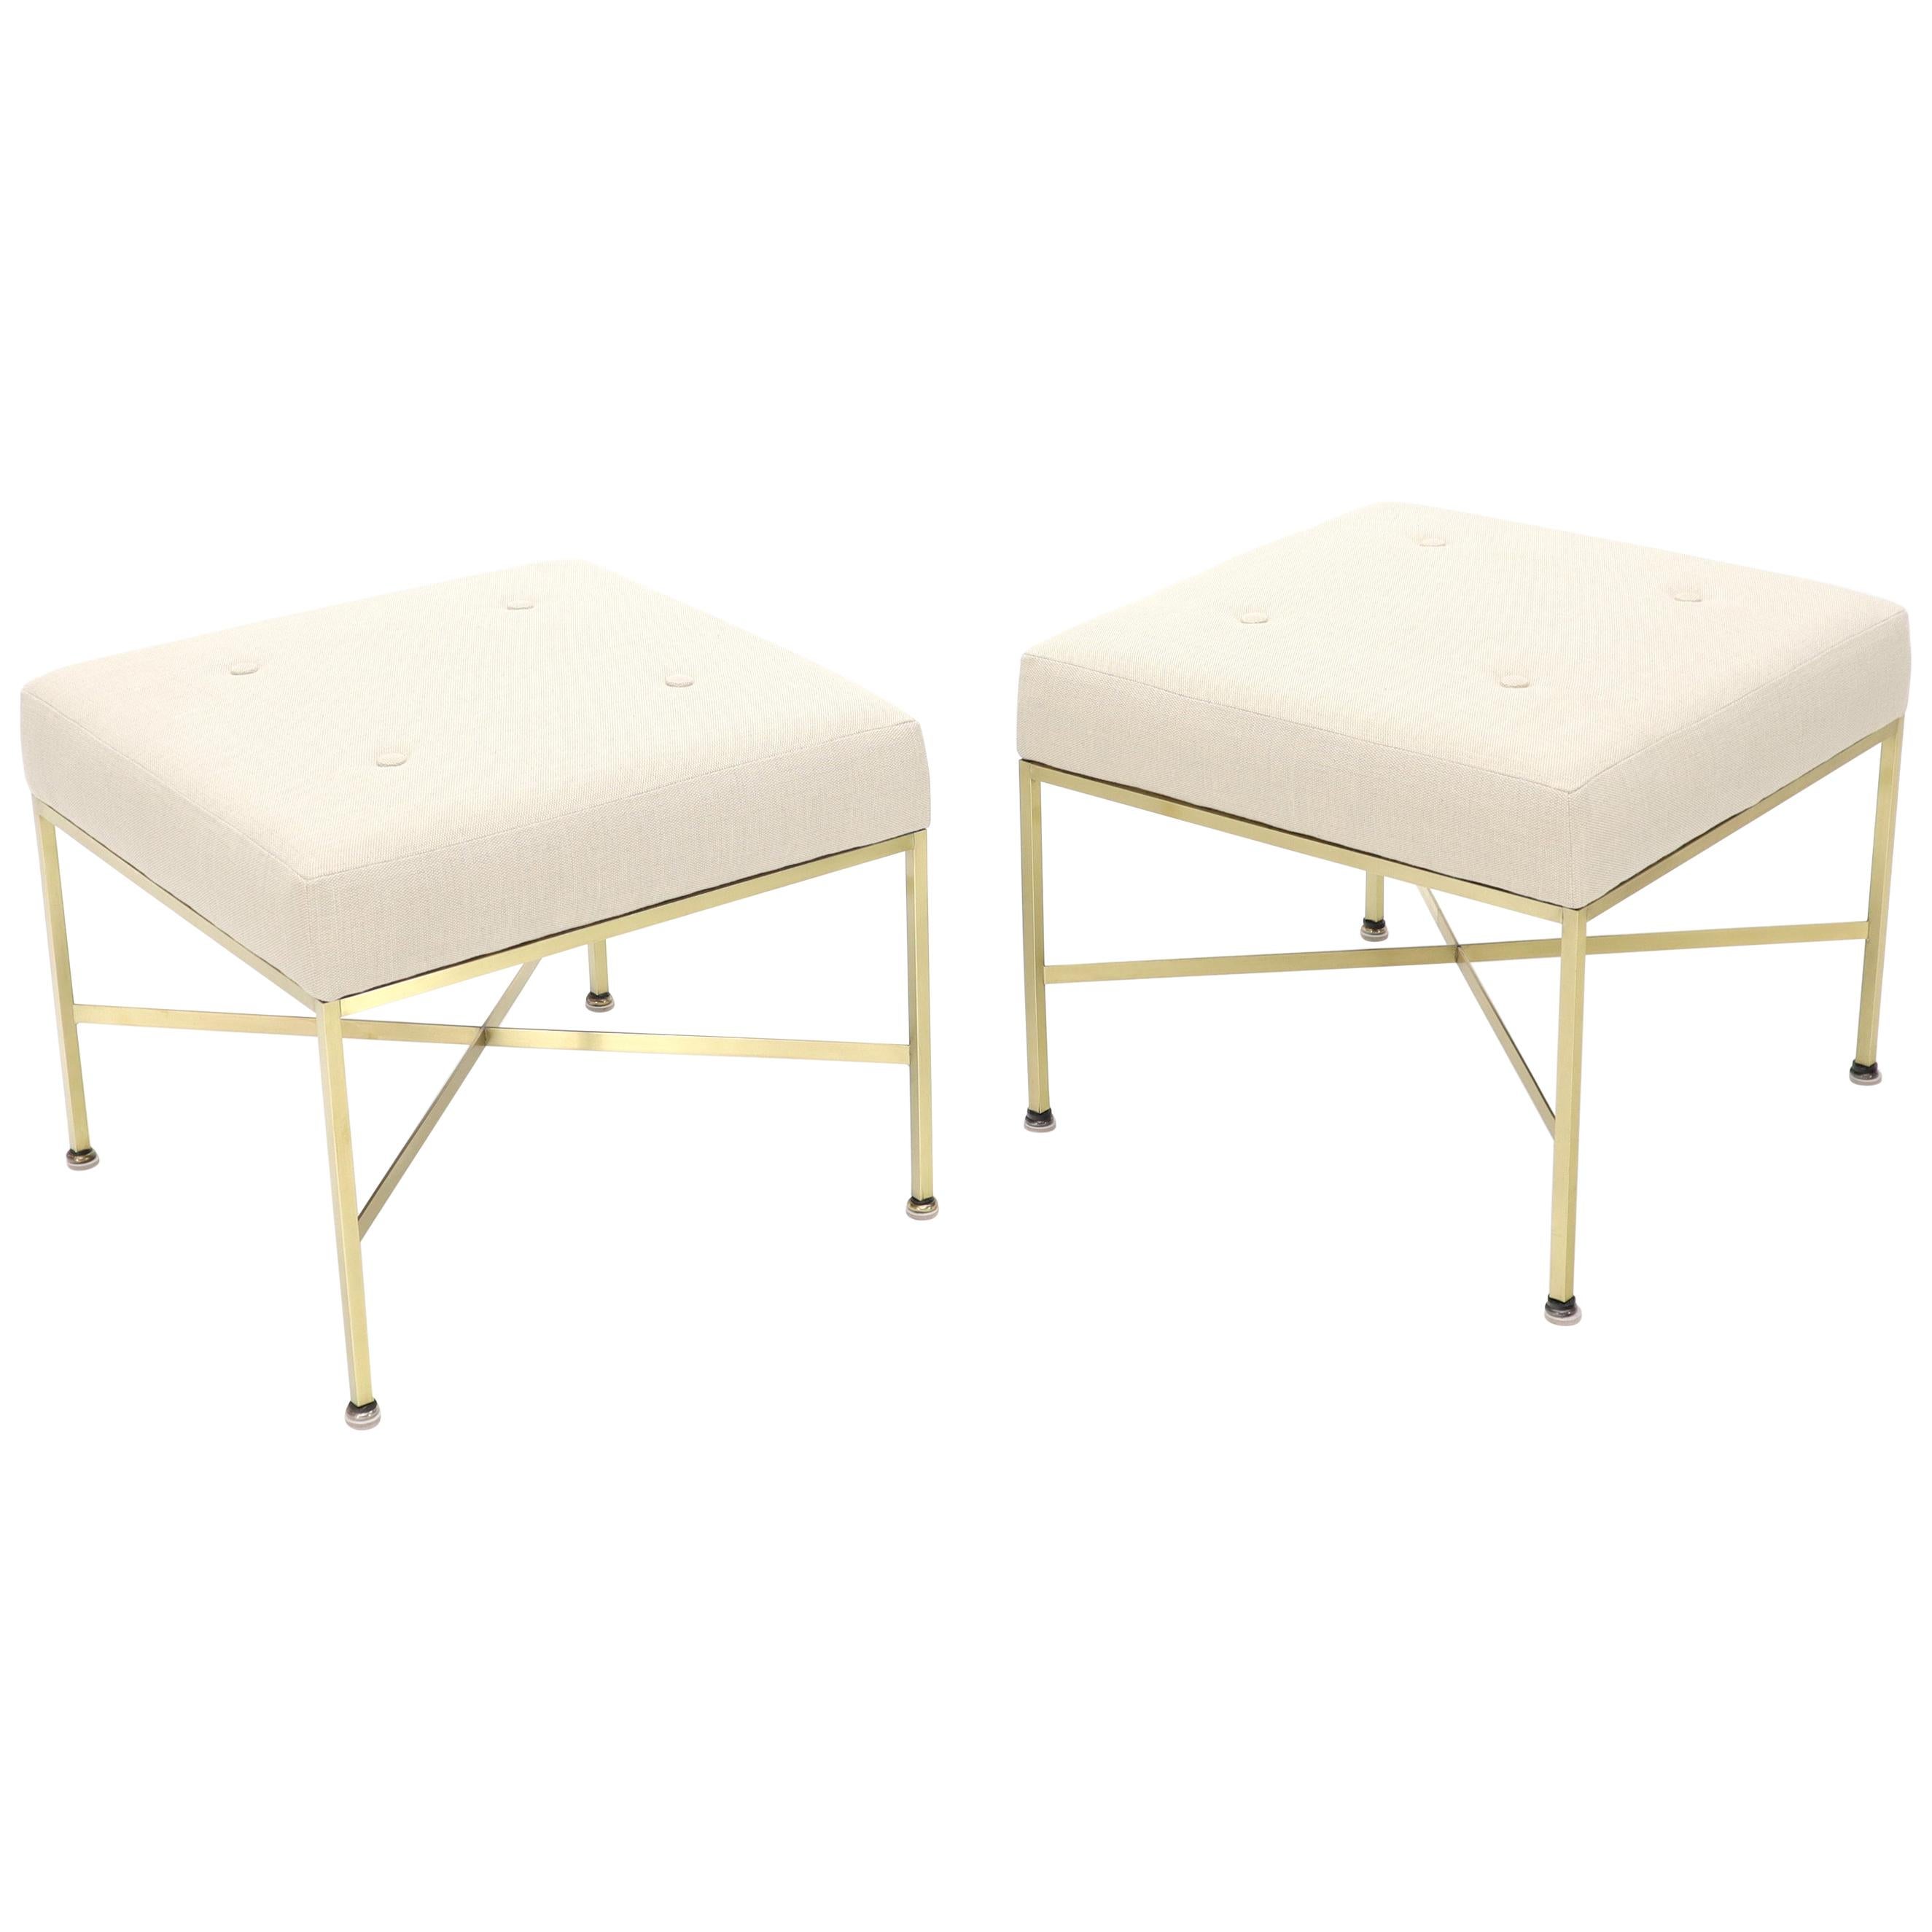 Pair of New Upholstery Square Brass Frames Benches Stools by Paul McCobb